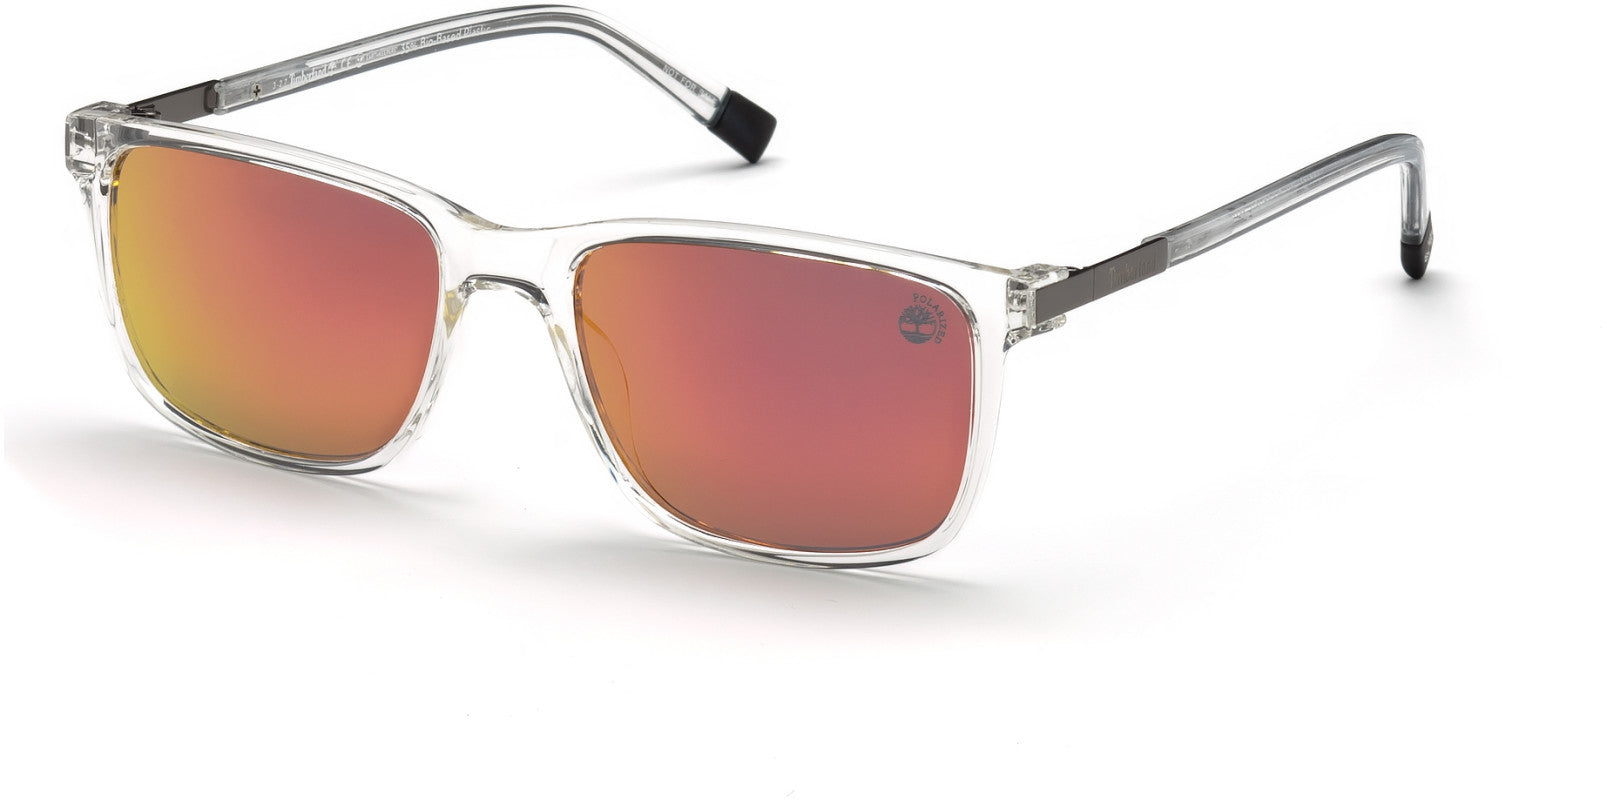 Timberland TB9152 Rectangular Sunglasses 26D-26D - Shiny Crystal Frame, Shiny Crystal Temple Tips / Red Mirror  Lenses